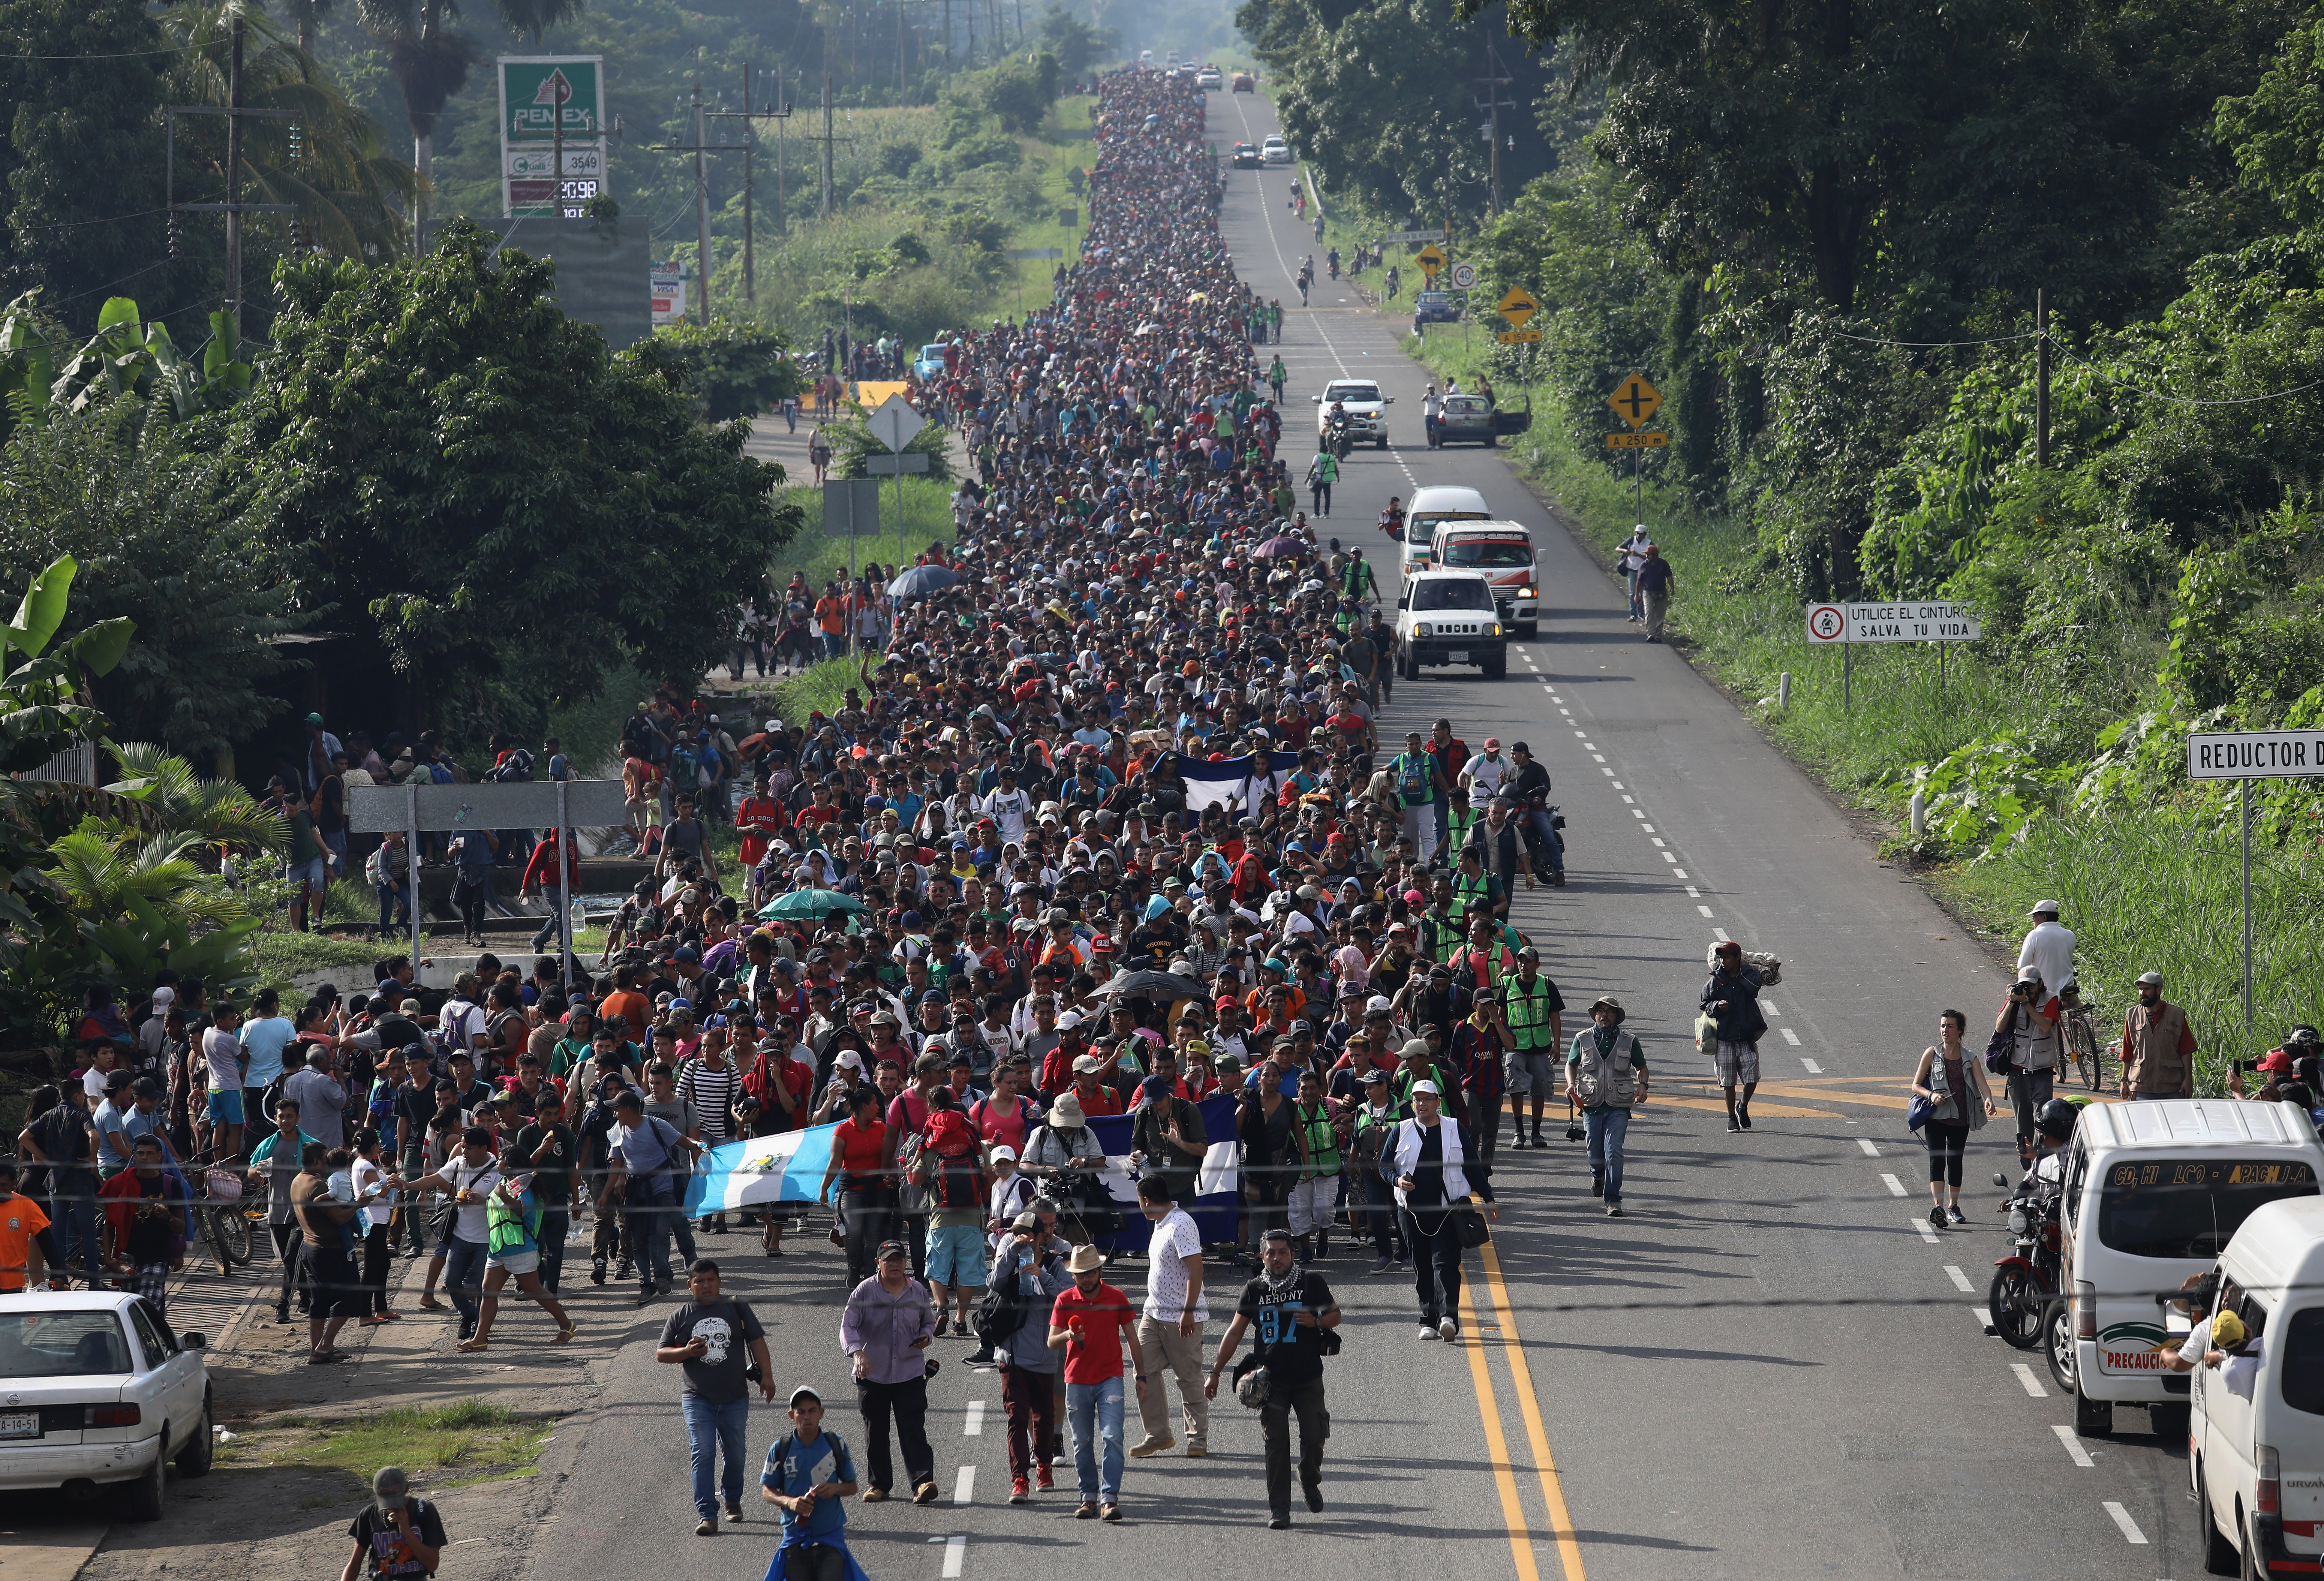 CIUDAD HIDALGO, MEXICO - OCTOBER 21: A migrant caravan, which has grown into the thousands, walks into the interior of Mexico after crossing the Guatemalan border on October 21, 2018 near Ciudad Hidalgo, Mexico The caravan of Central Americans plans to eventually reach the United States. U.S. President Donald Trump has threatened to cancel the recent trade deal with Mexico and withhold aid to Central American countries if the caravan isn't stopped before reaching the U.S. (Photo by John Moore/Getty Images)